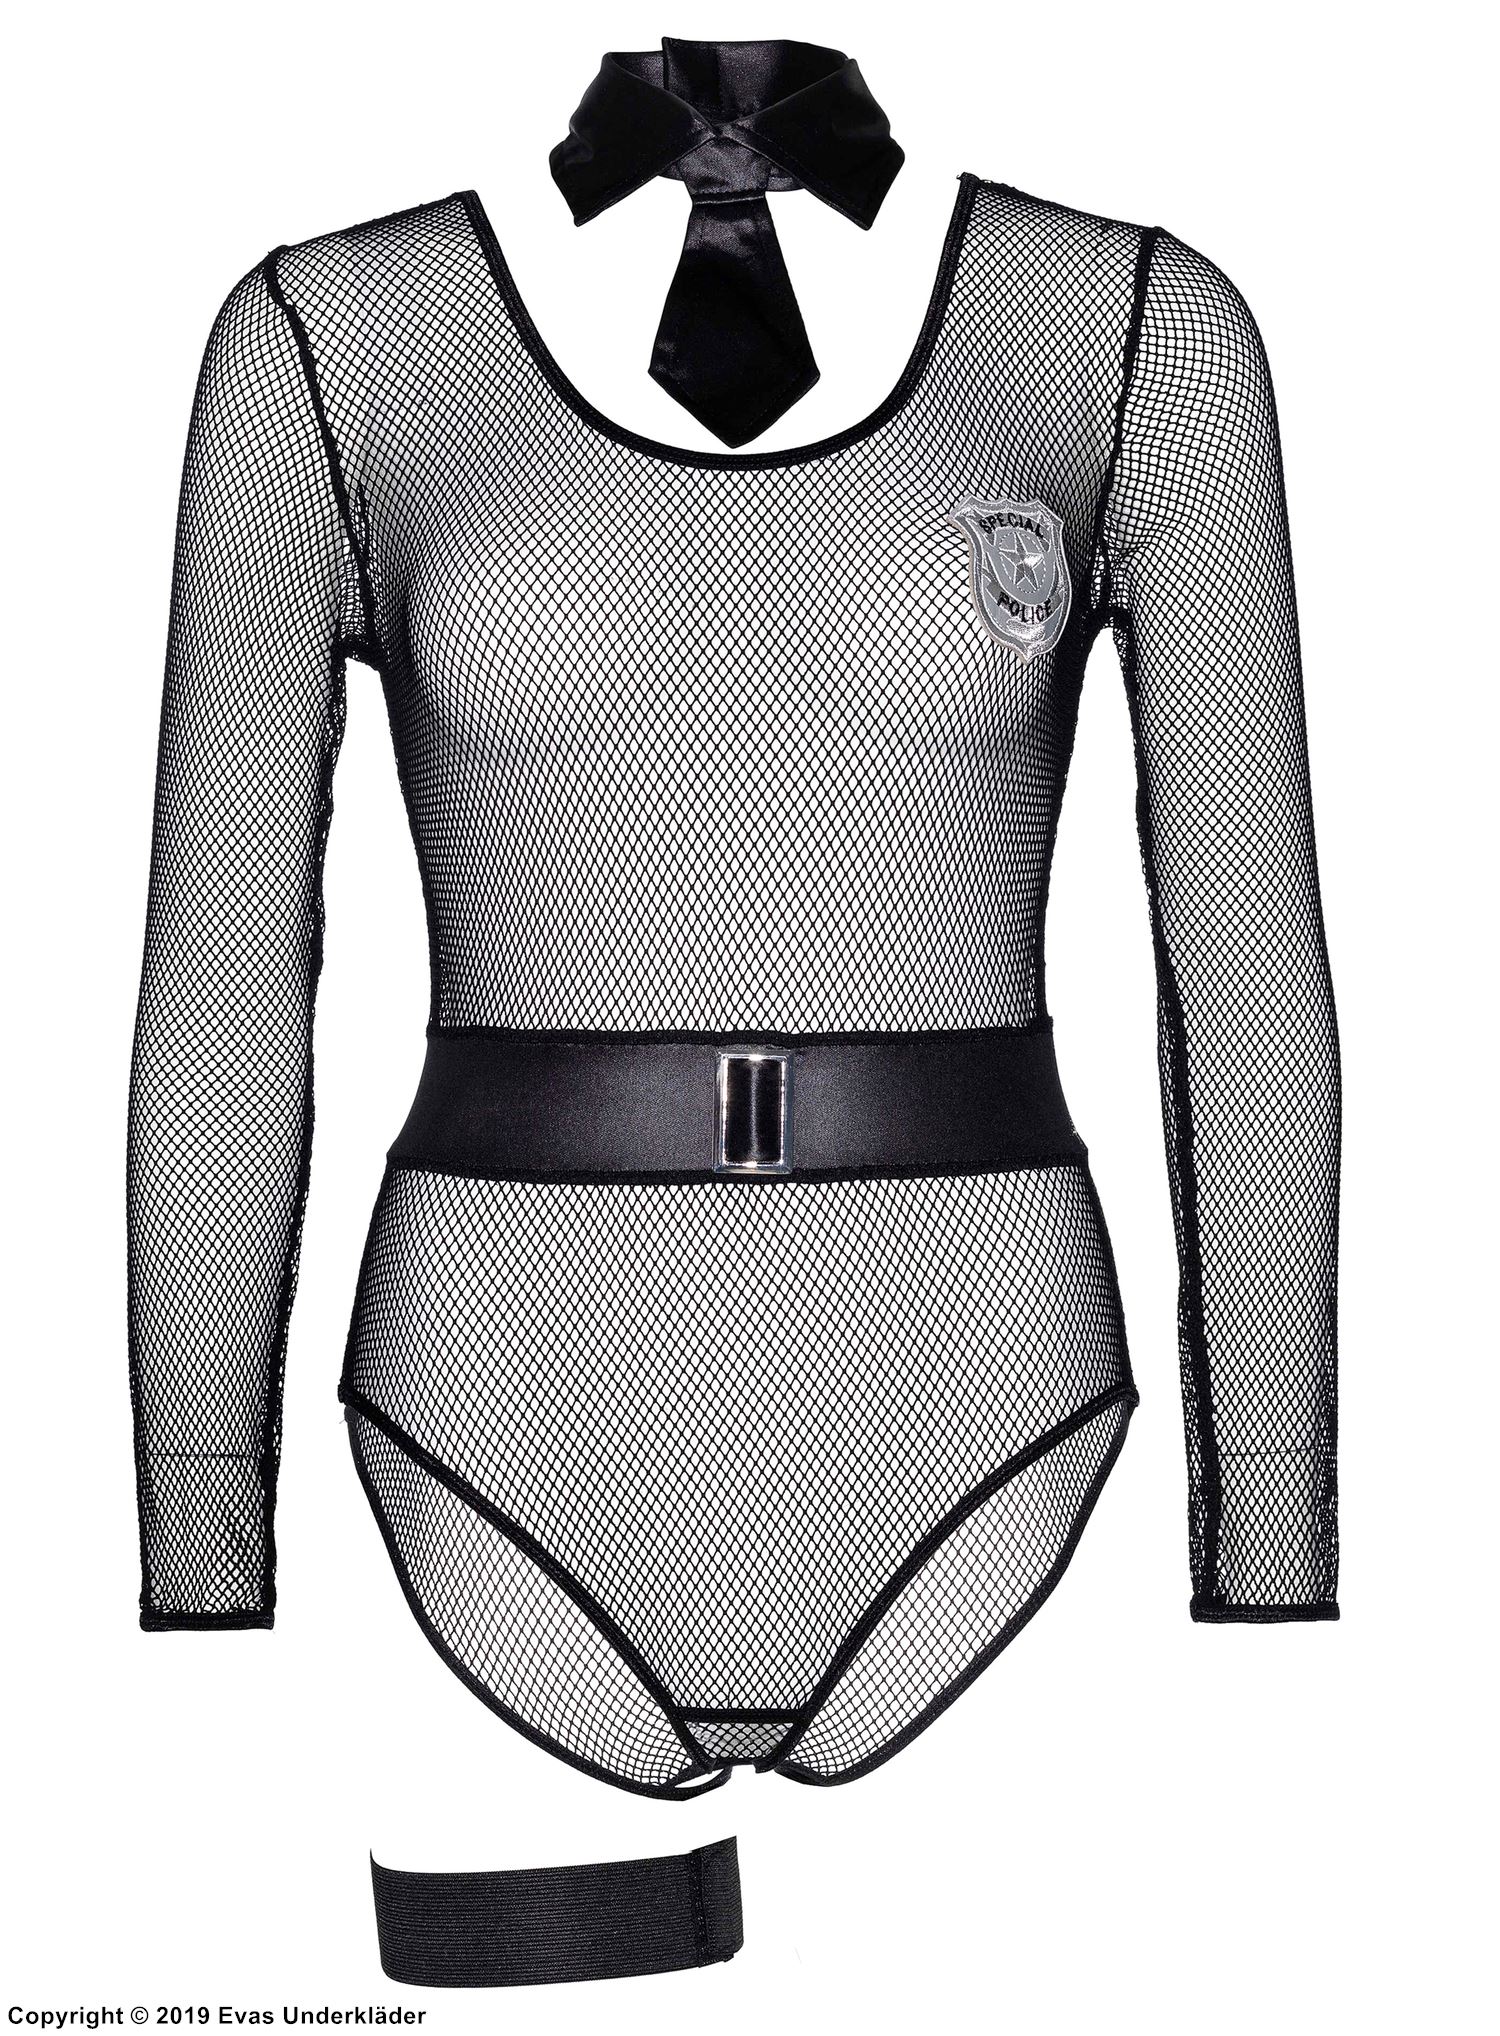 Female police officer, teddy costume, fishnet, open crotch